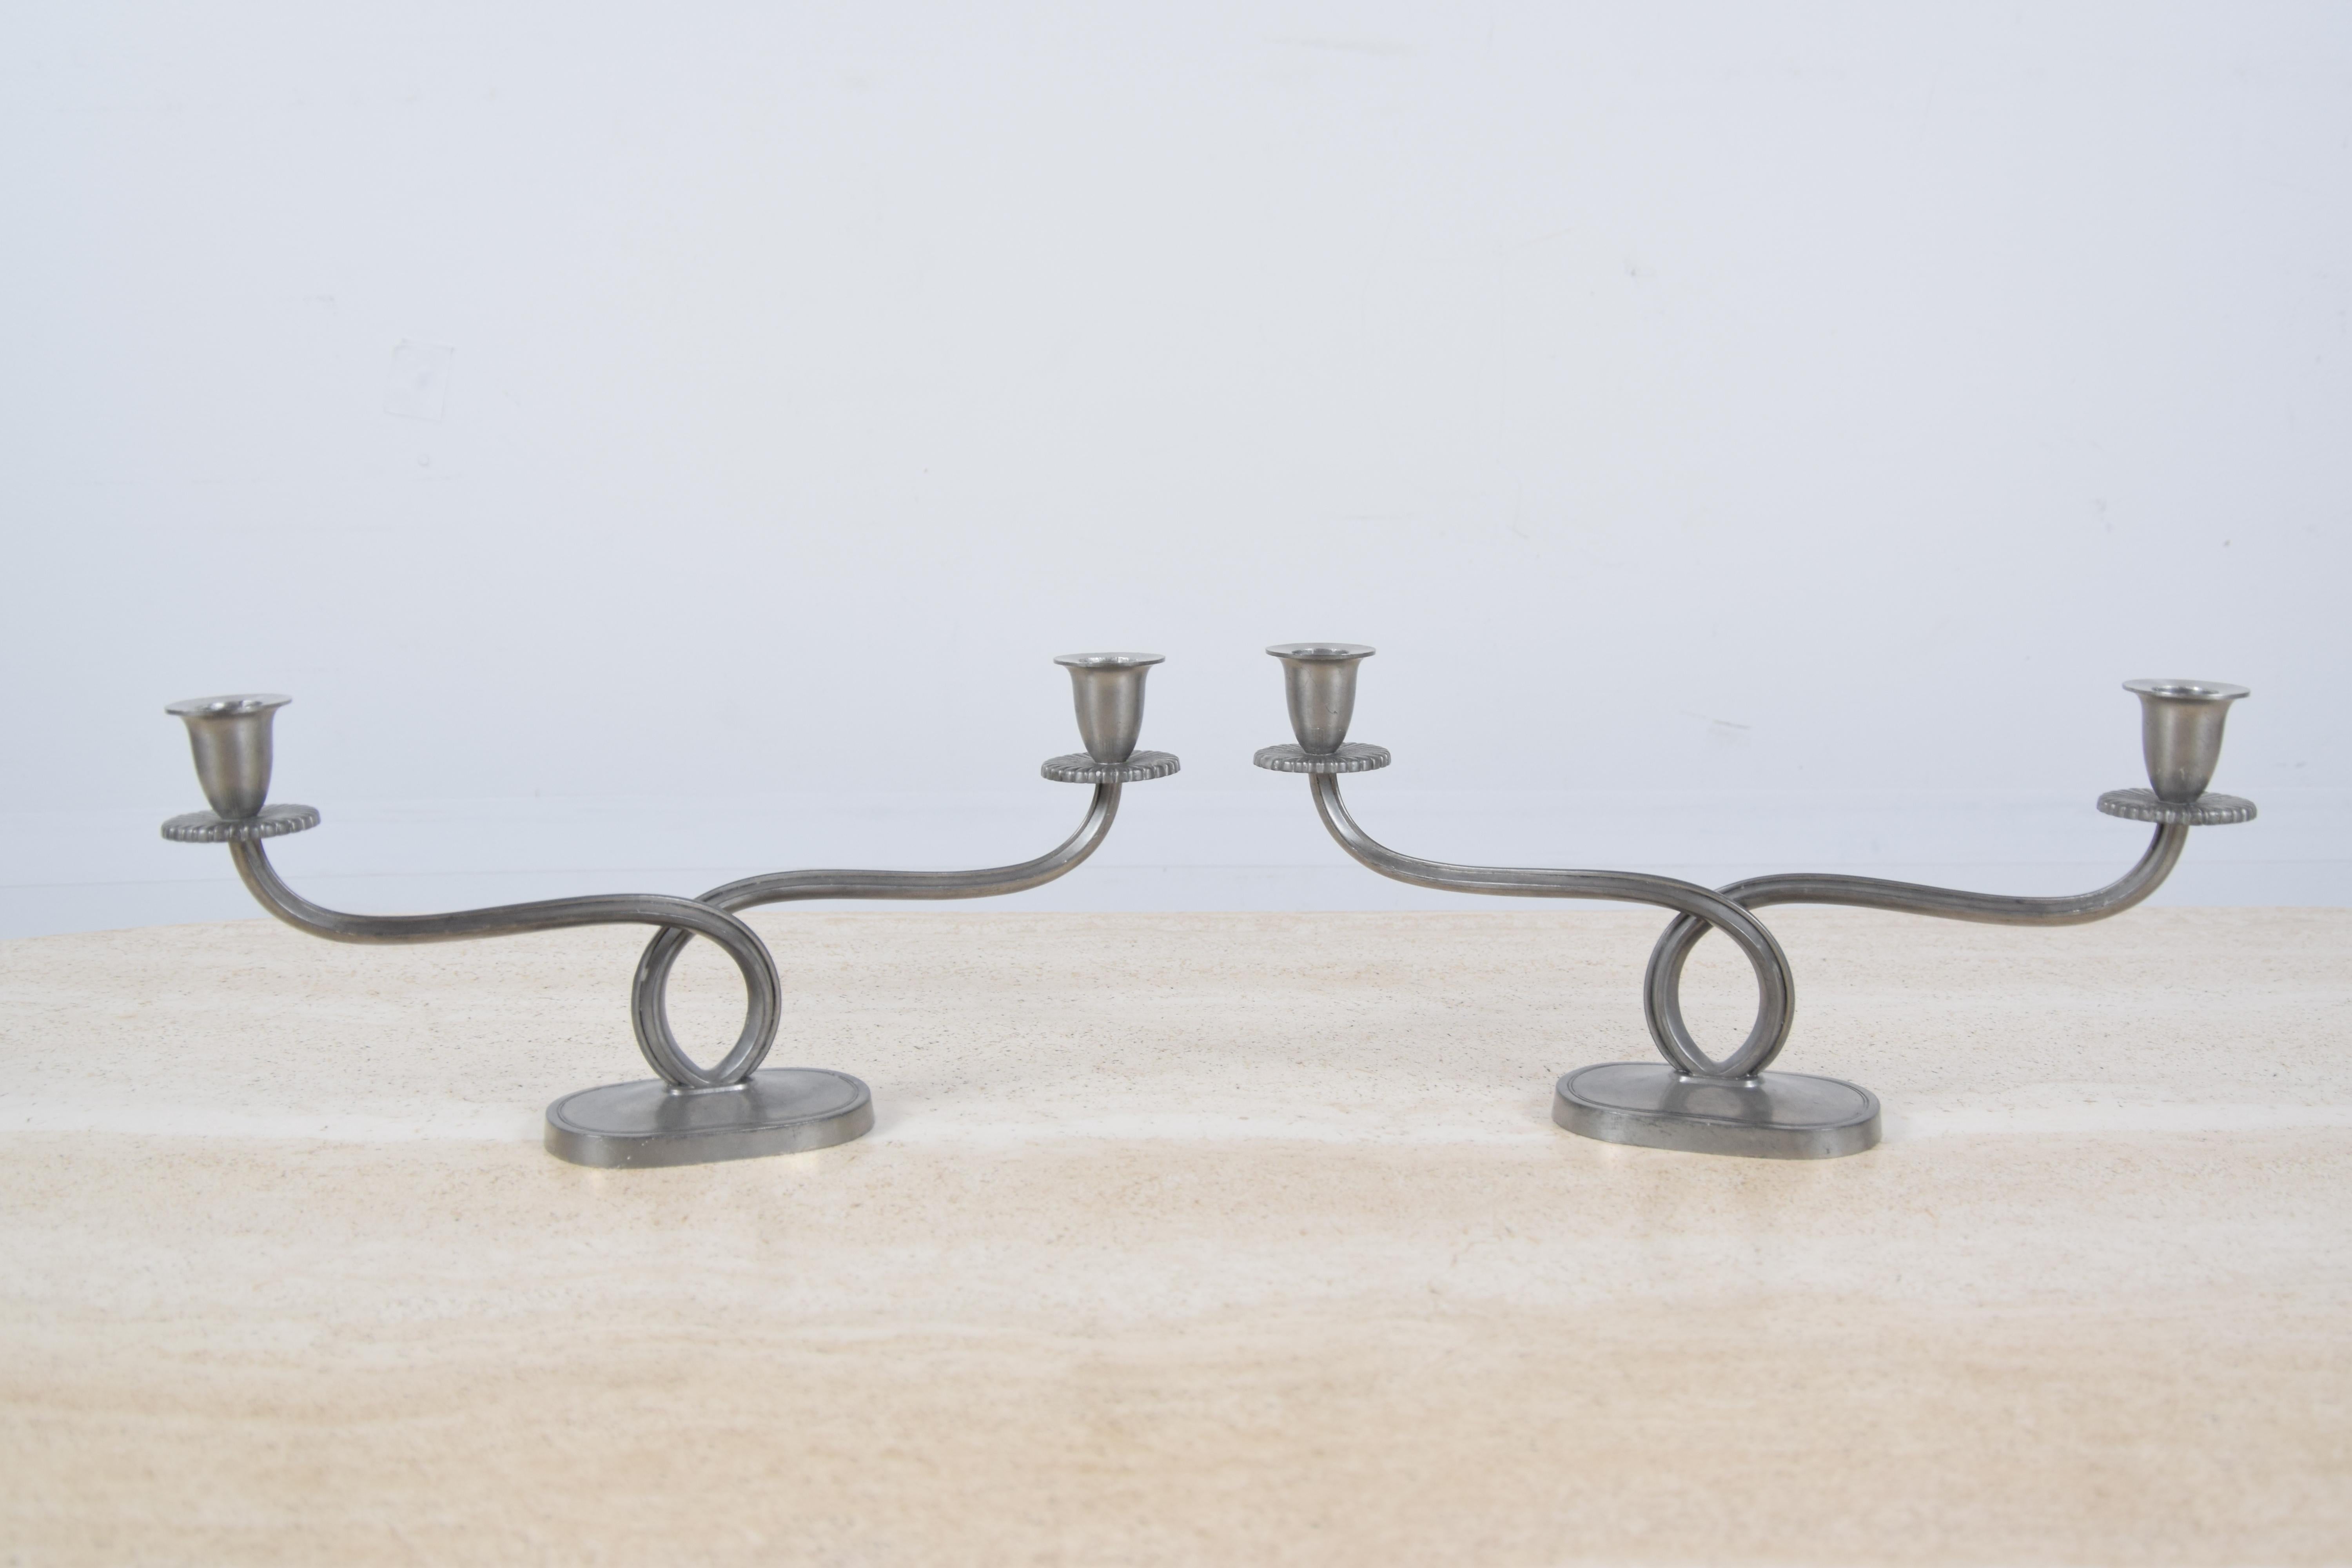 Pair of pewter candlesticks, circa 1955, by Danish Metal-smith Just Andersen. Candlesticks stand 6 1/2